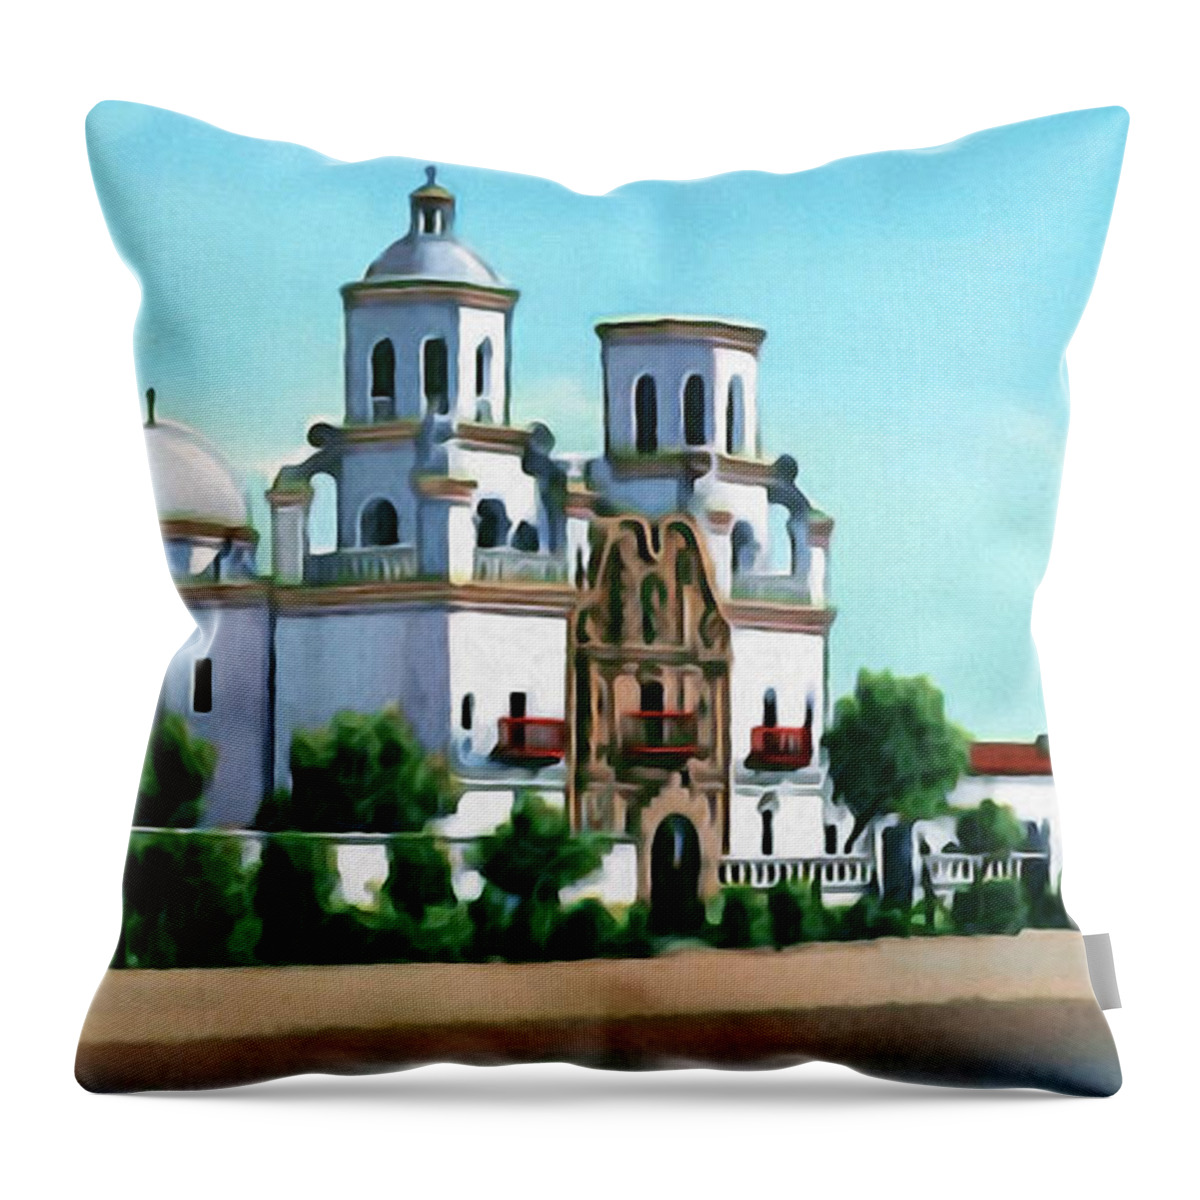 Vintage Postcard Throw Pillow featuring the digital art San Xavier del Bac Mission by Walter Colvin